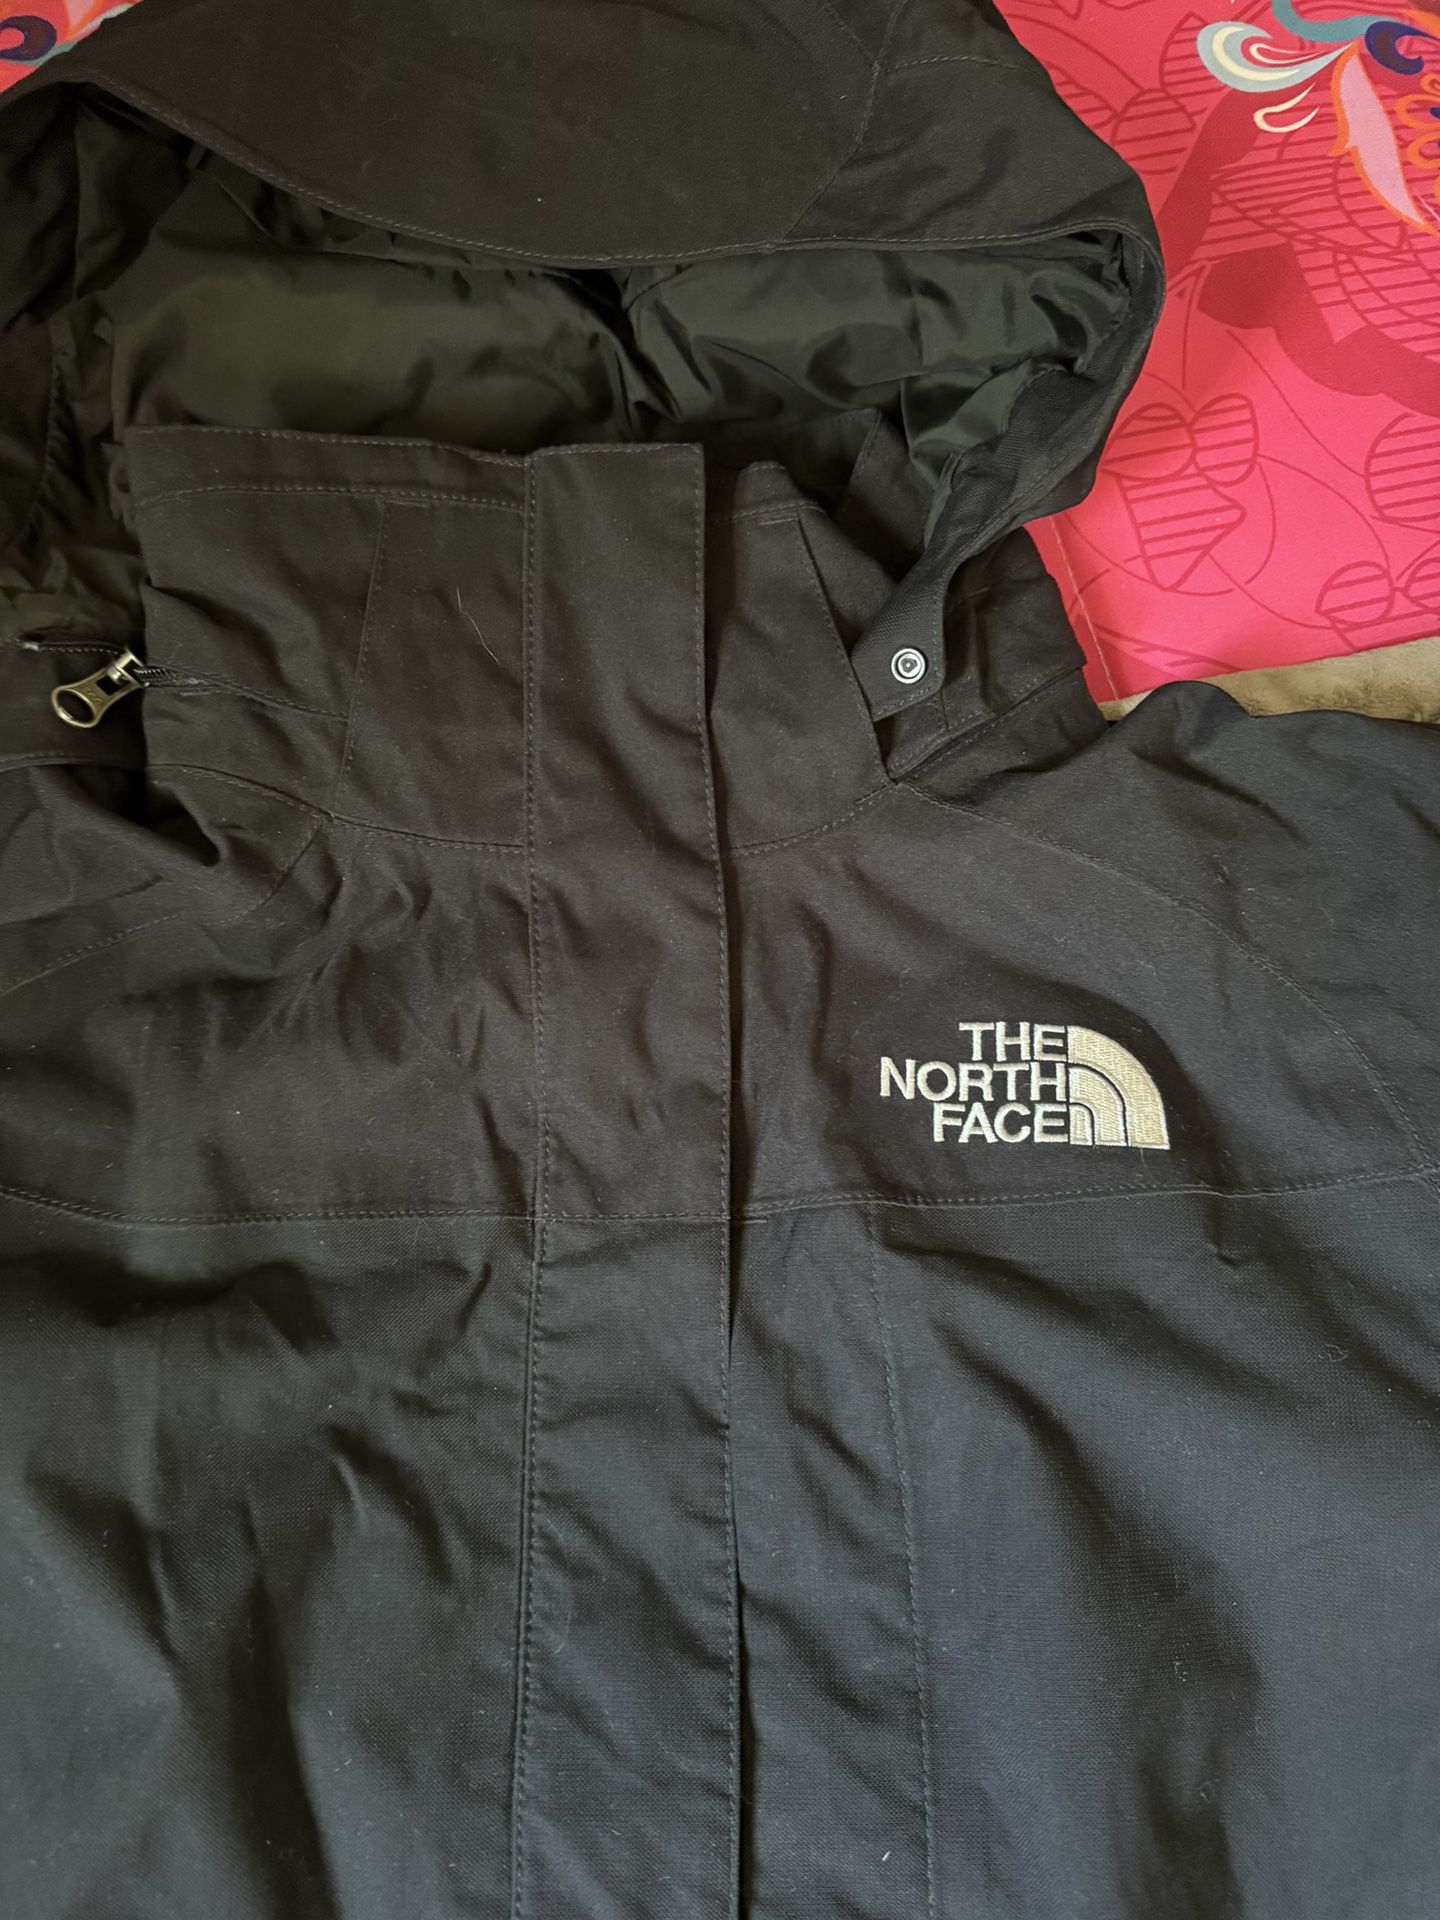 Girls north face jackets